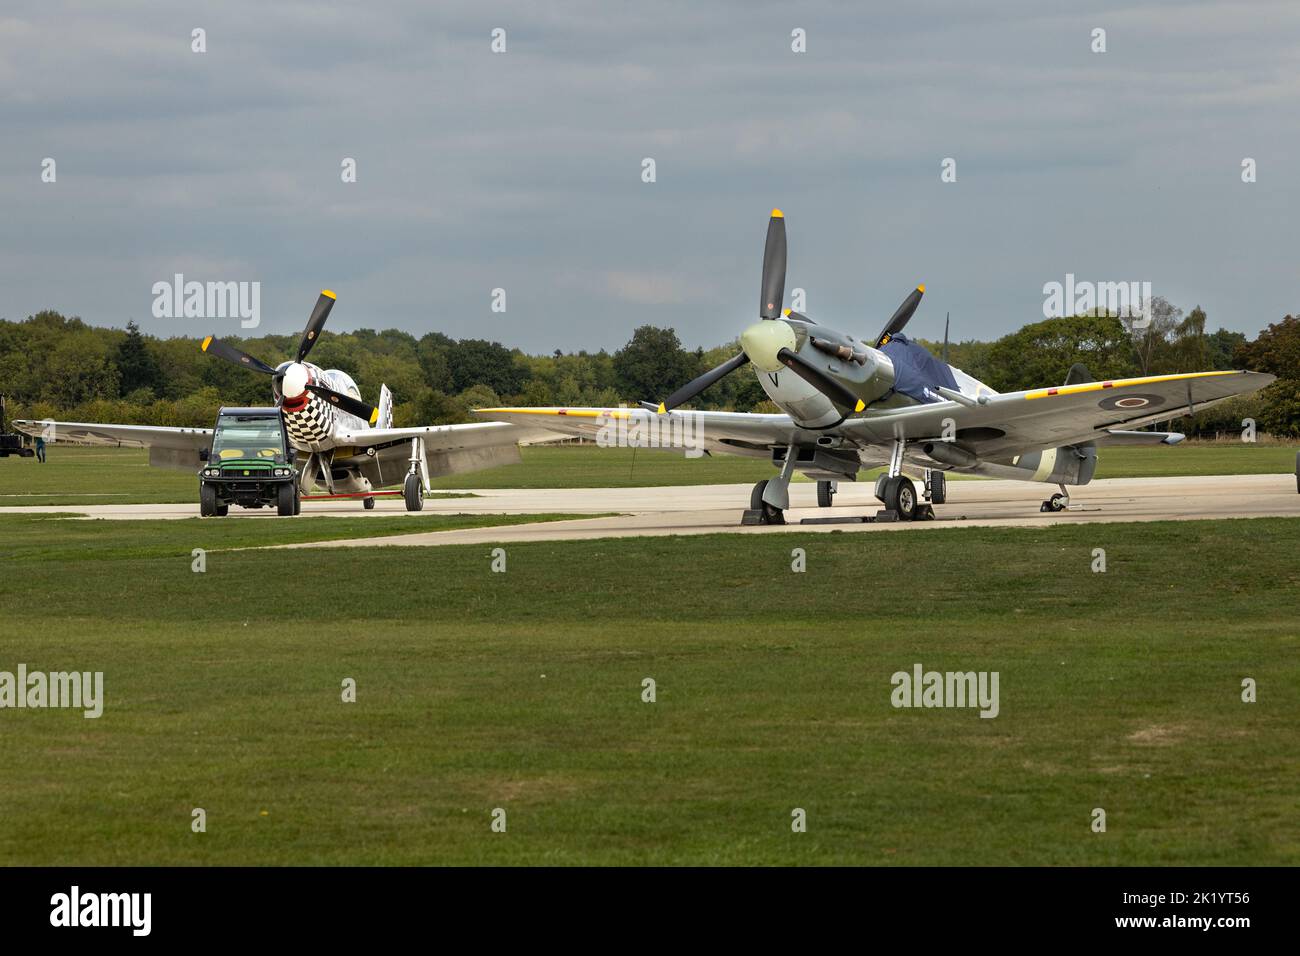 Spitfire and Mustang Second World War fighter planes on the apron at an airfield in the UK Stock Photo